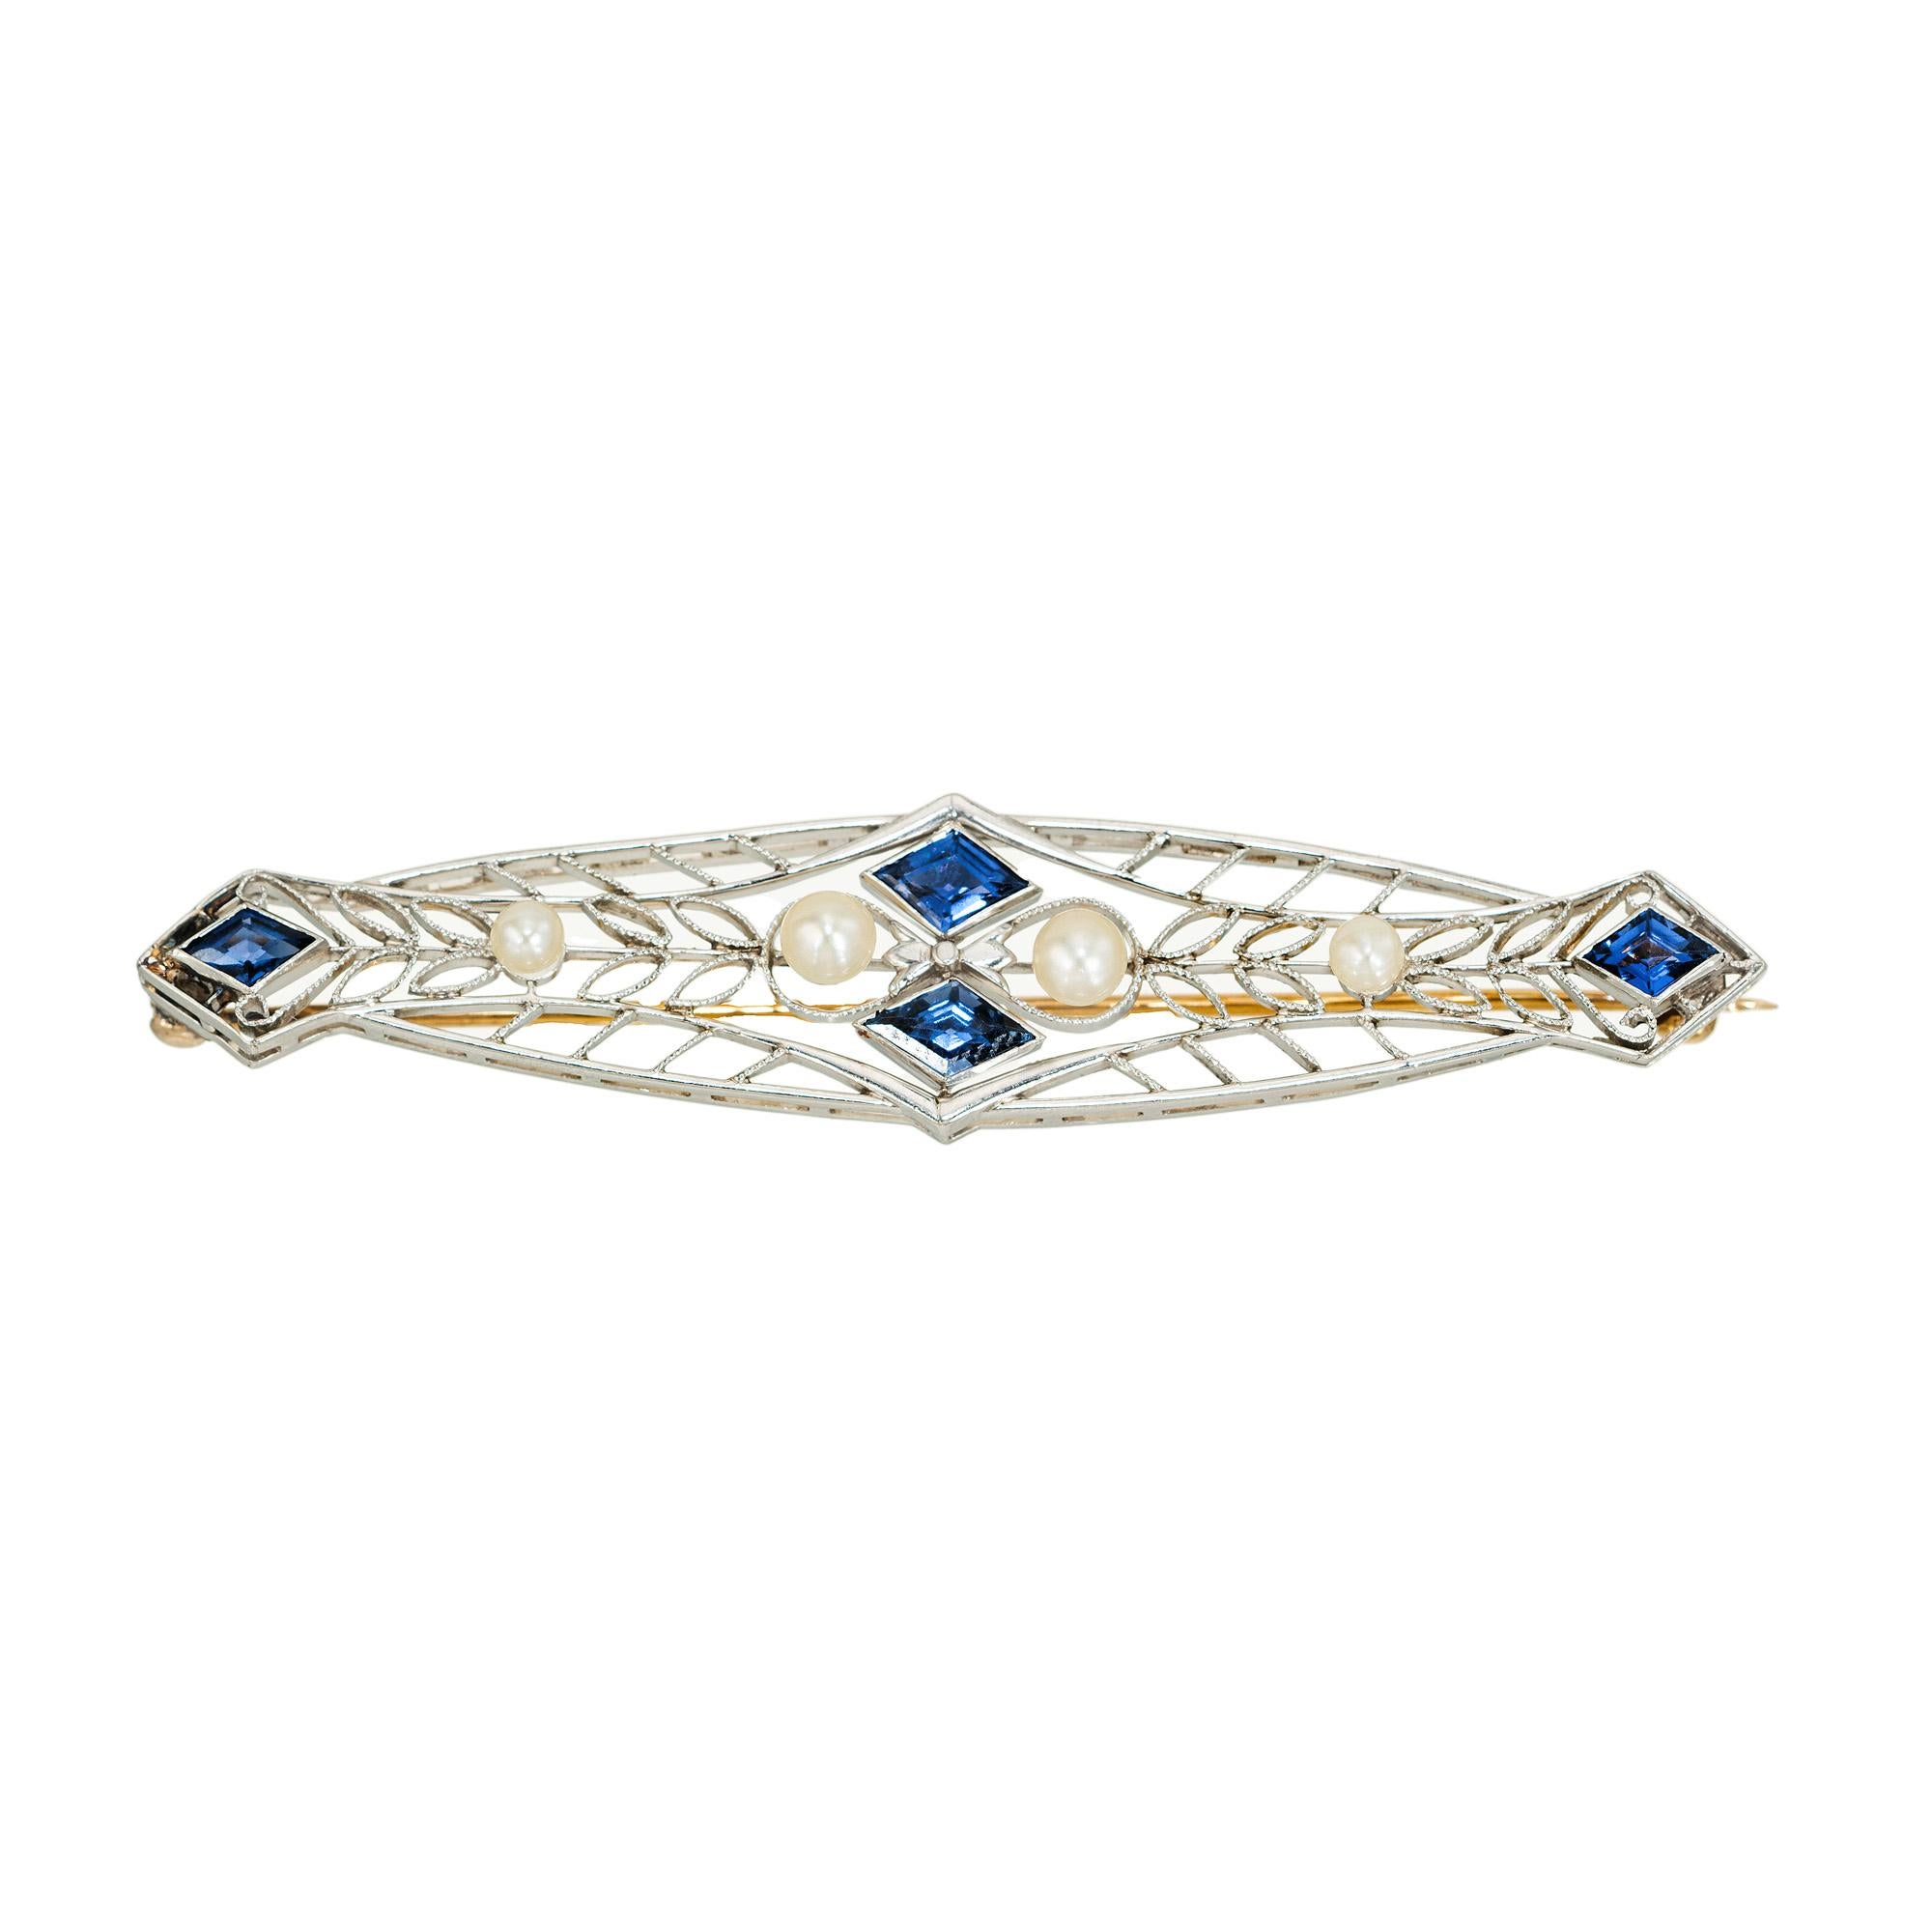 Natural no heat Yogo Gulch Montana Sapphires, circa 1910. Four rare Art Deco kite shaped AGL certified natural, no heat Sapphires mounted on a platinum setting and accented with 4 natural pearls. The brooch is hand made in Platinum with a 14k yellow